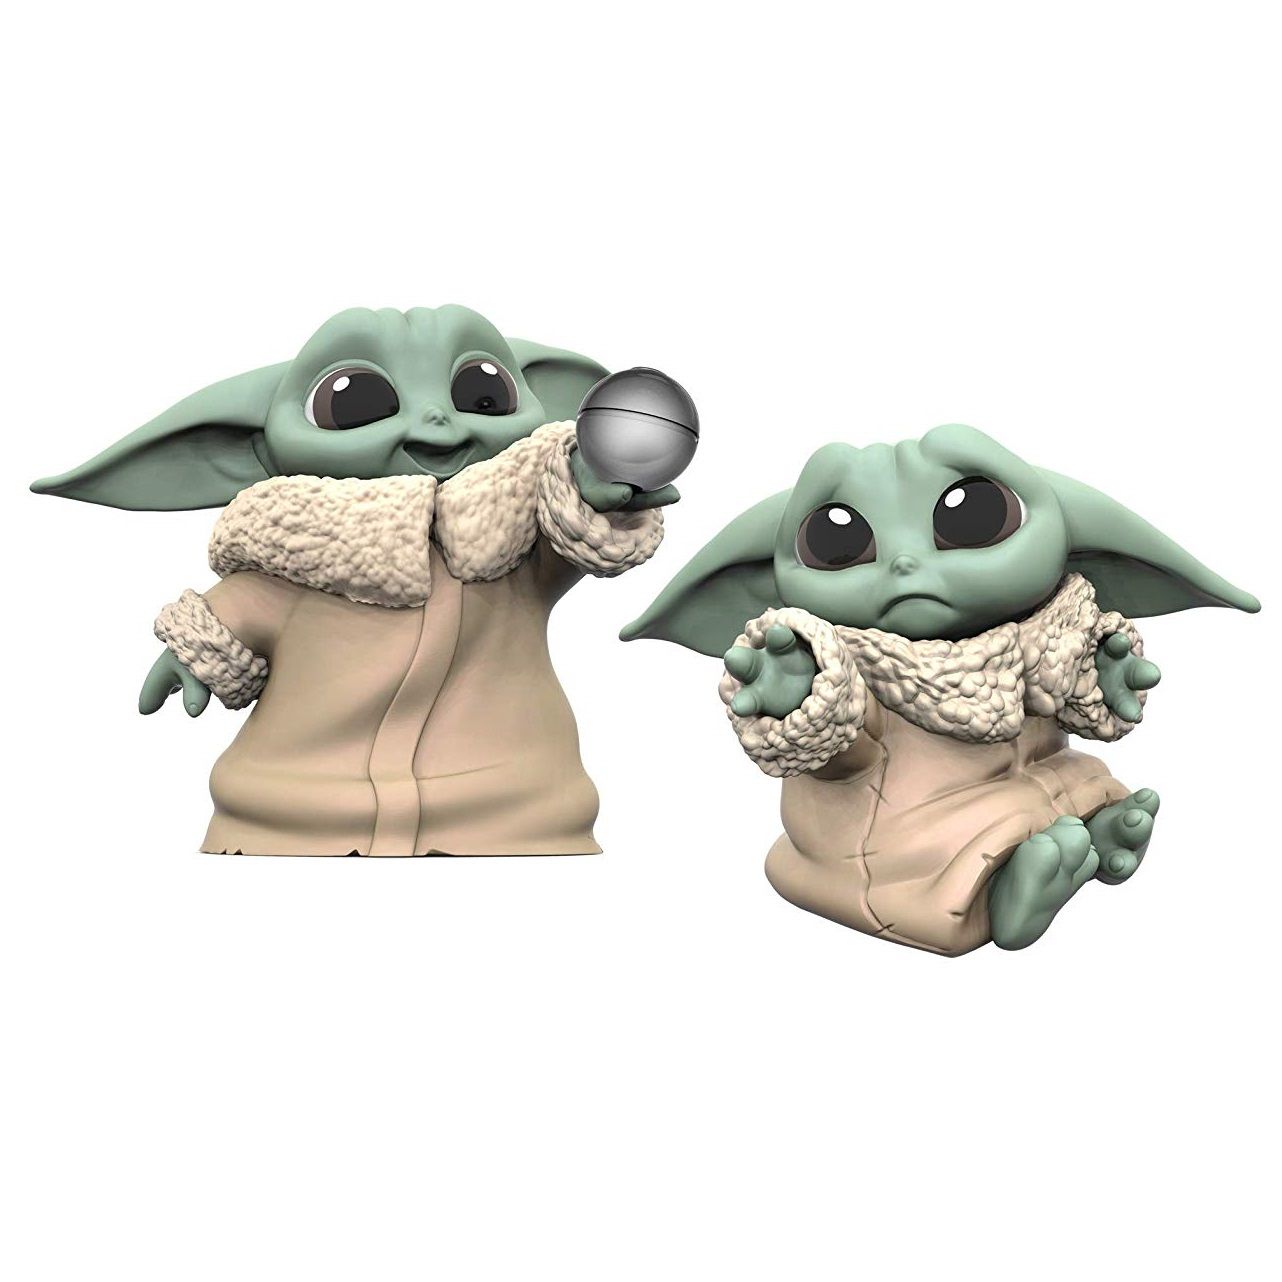 Amazon Is Selling Collectible Baby Yoda Toys, So Prepare To Empty Your Bank Account